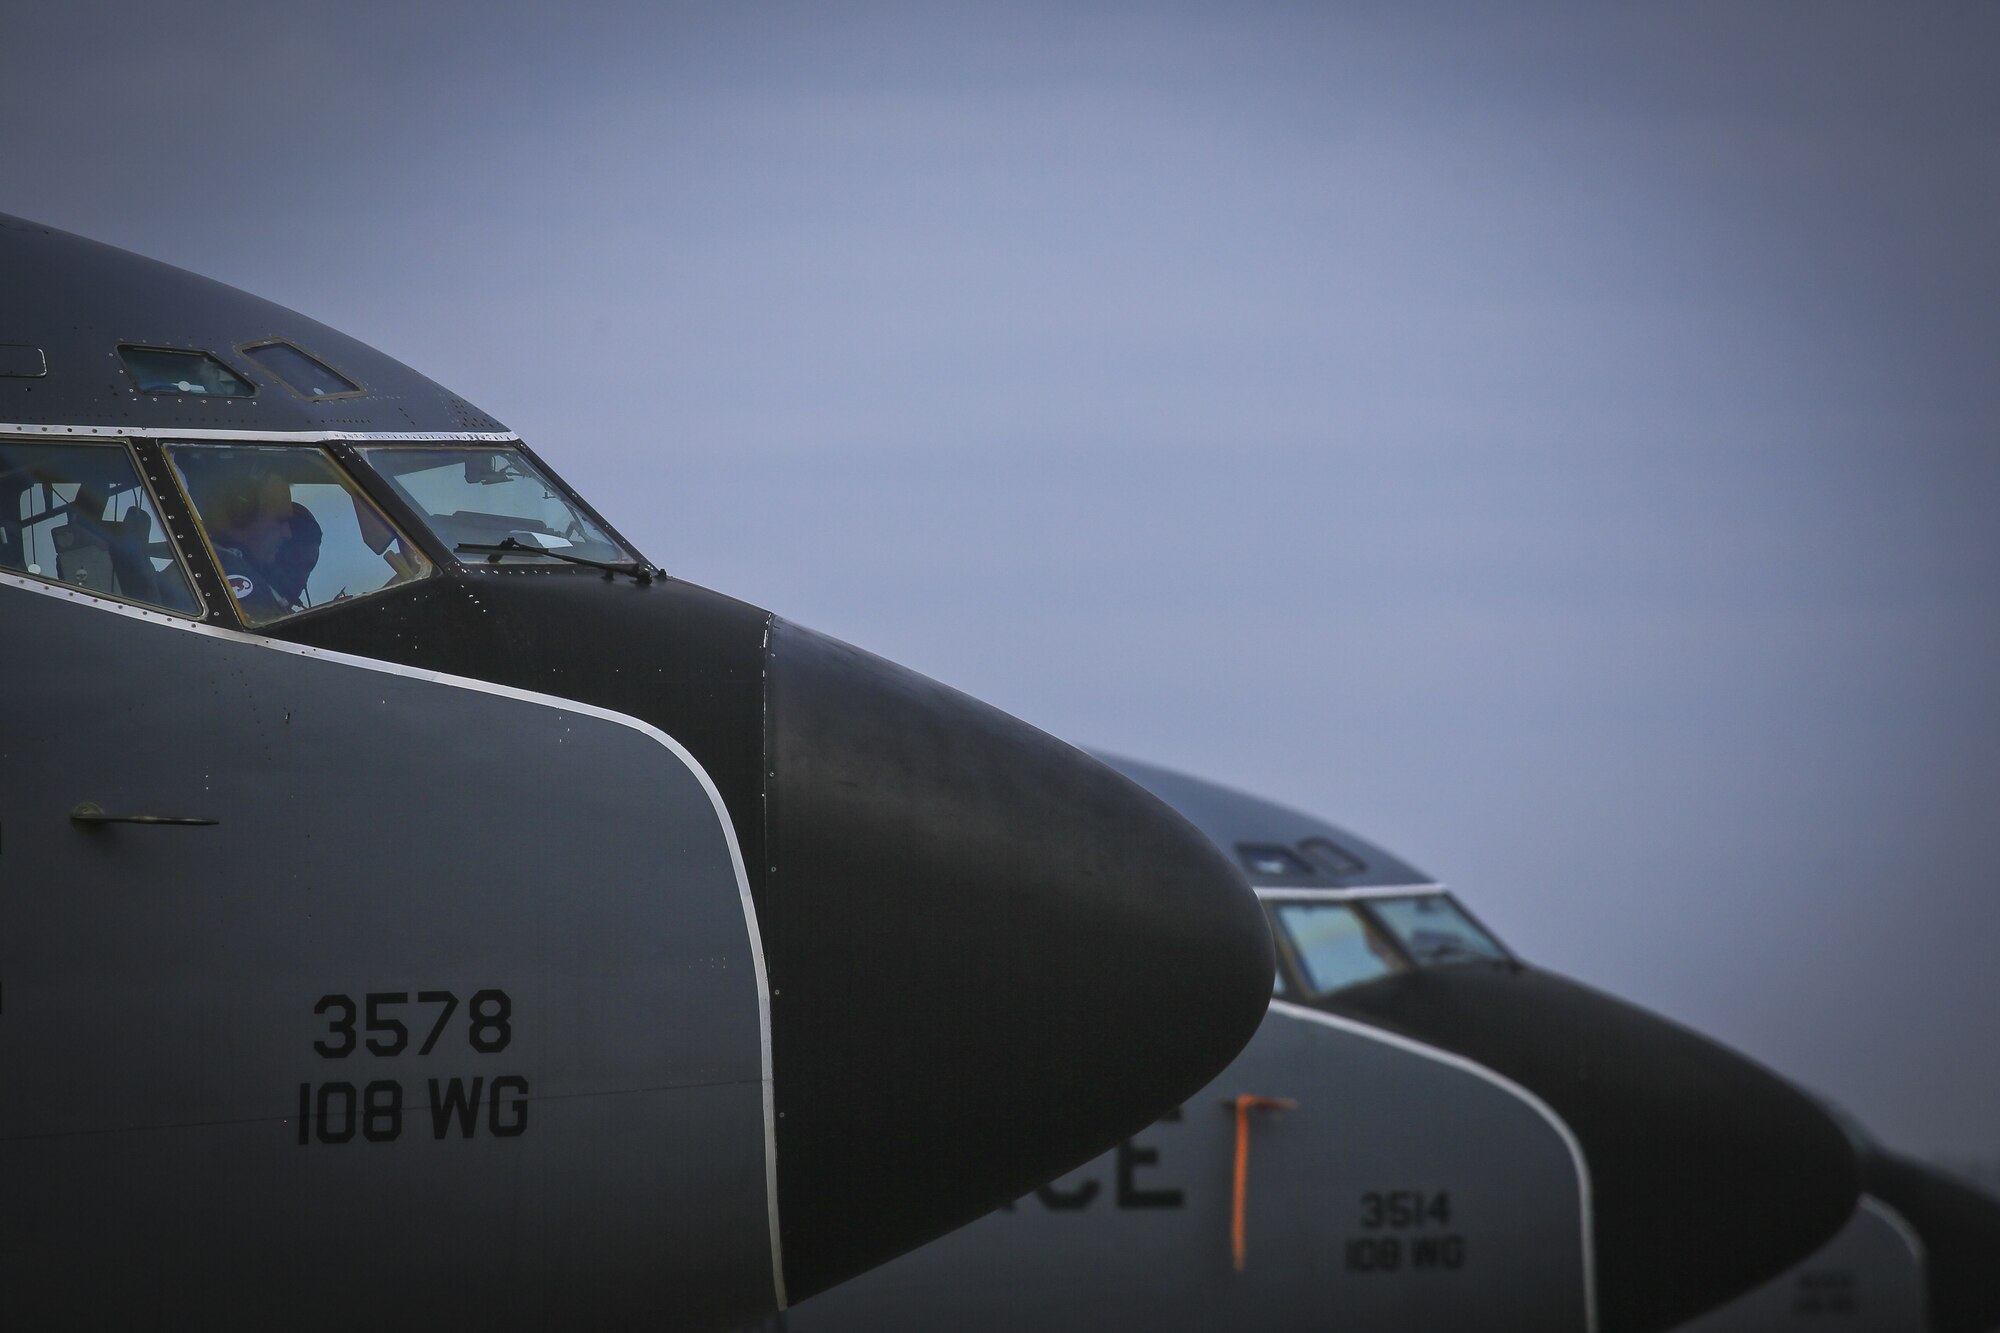 A New Jersey Air National Guard  KC-135R Stratotanker crew from the 108th Wing prepares their aircraft for a training flight on Joint Base McGuire-Dix-Lakehurst, N.J., Jan. 11, 2018. (U.S. Air National Guard photo by Master Sgt. Matt Hecht)